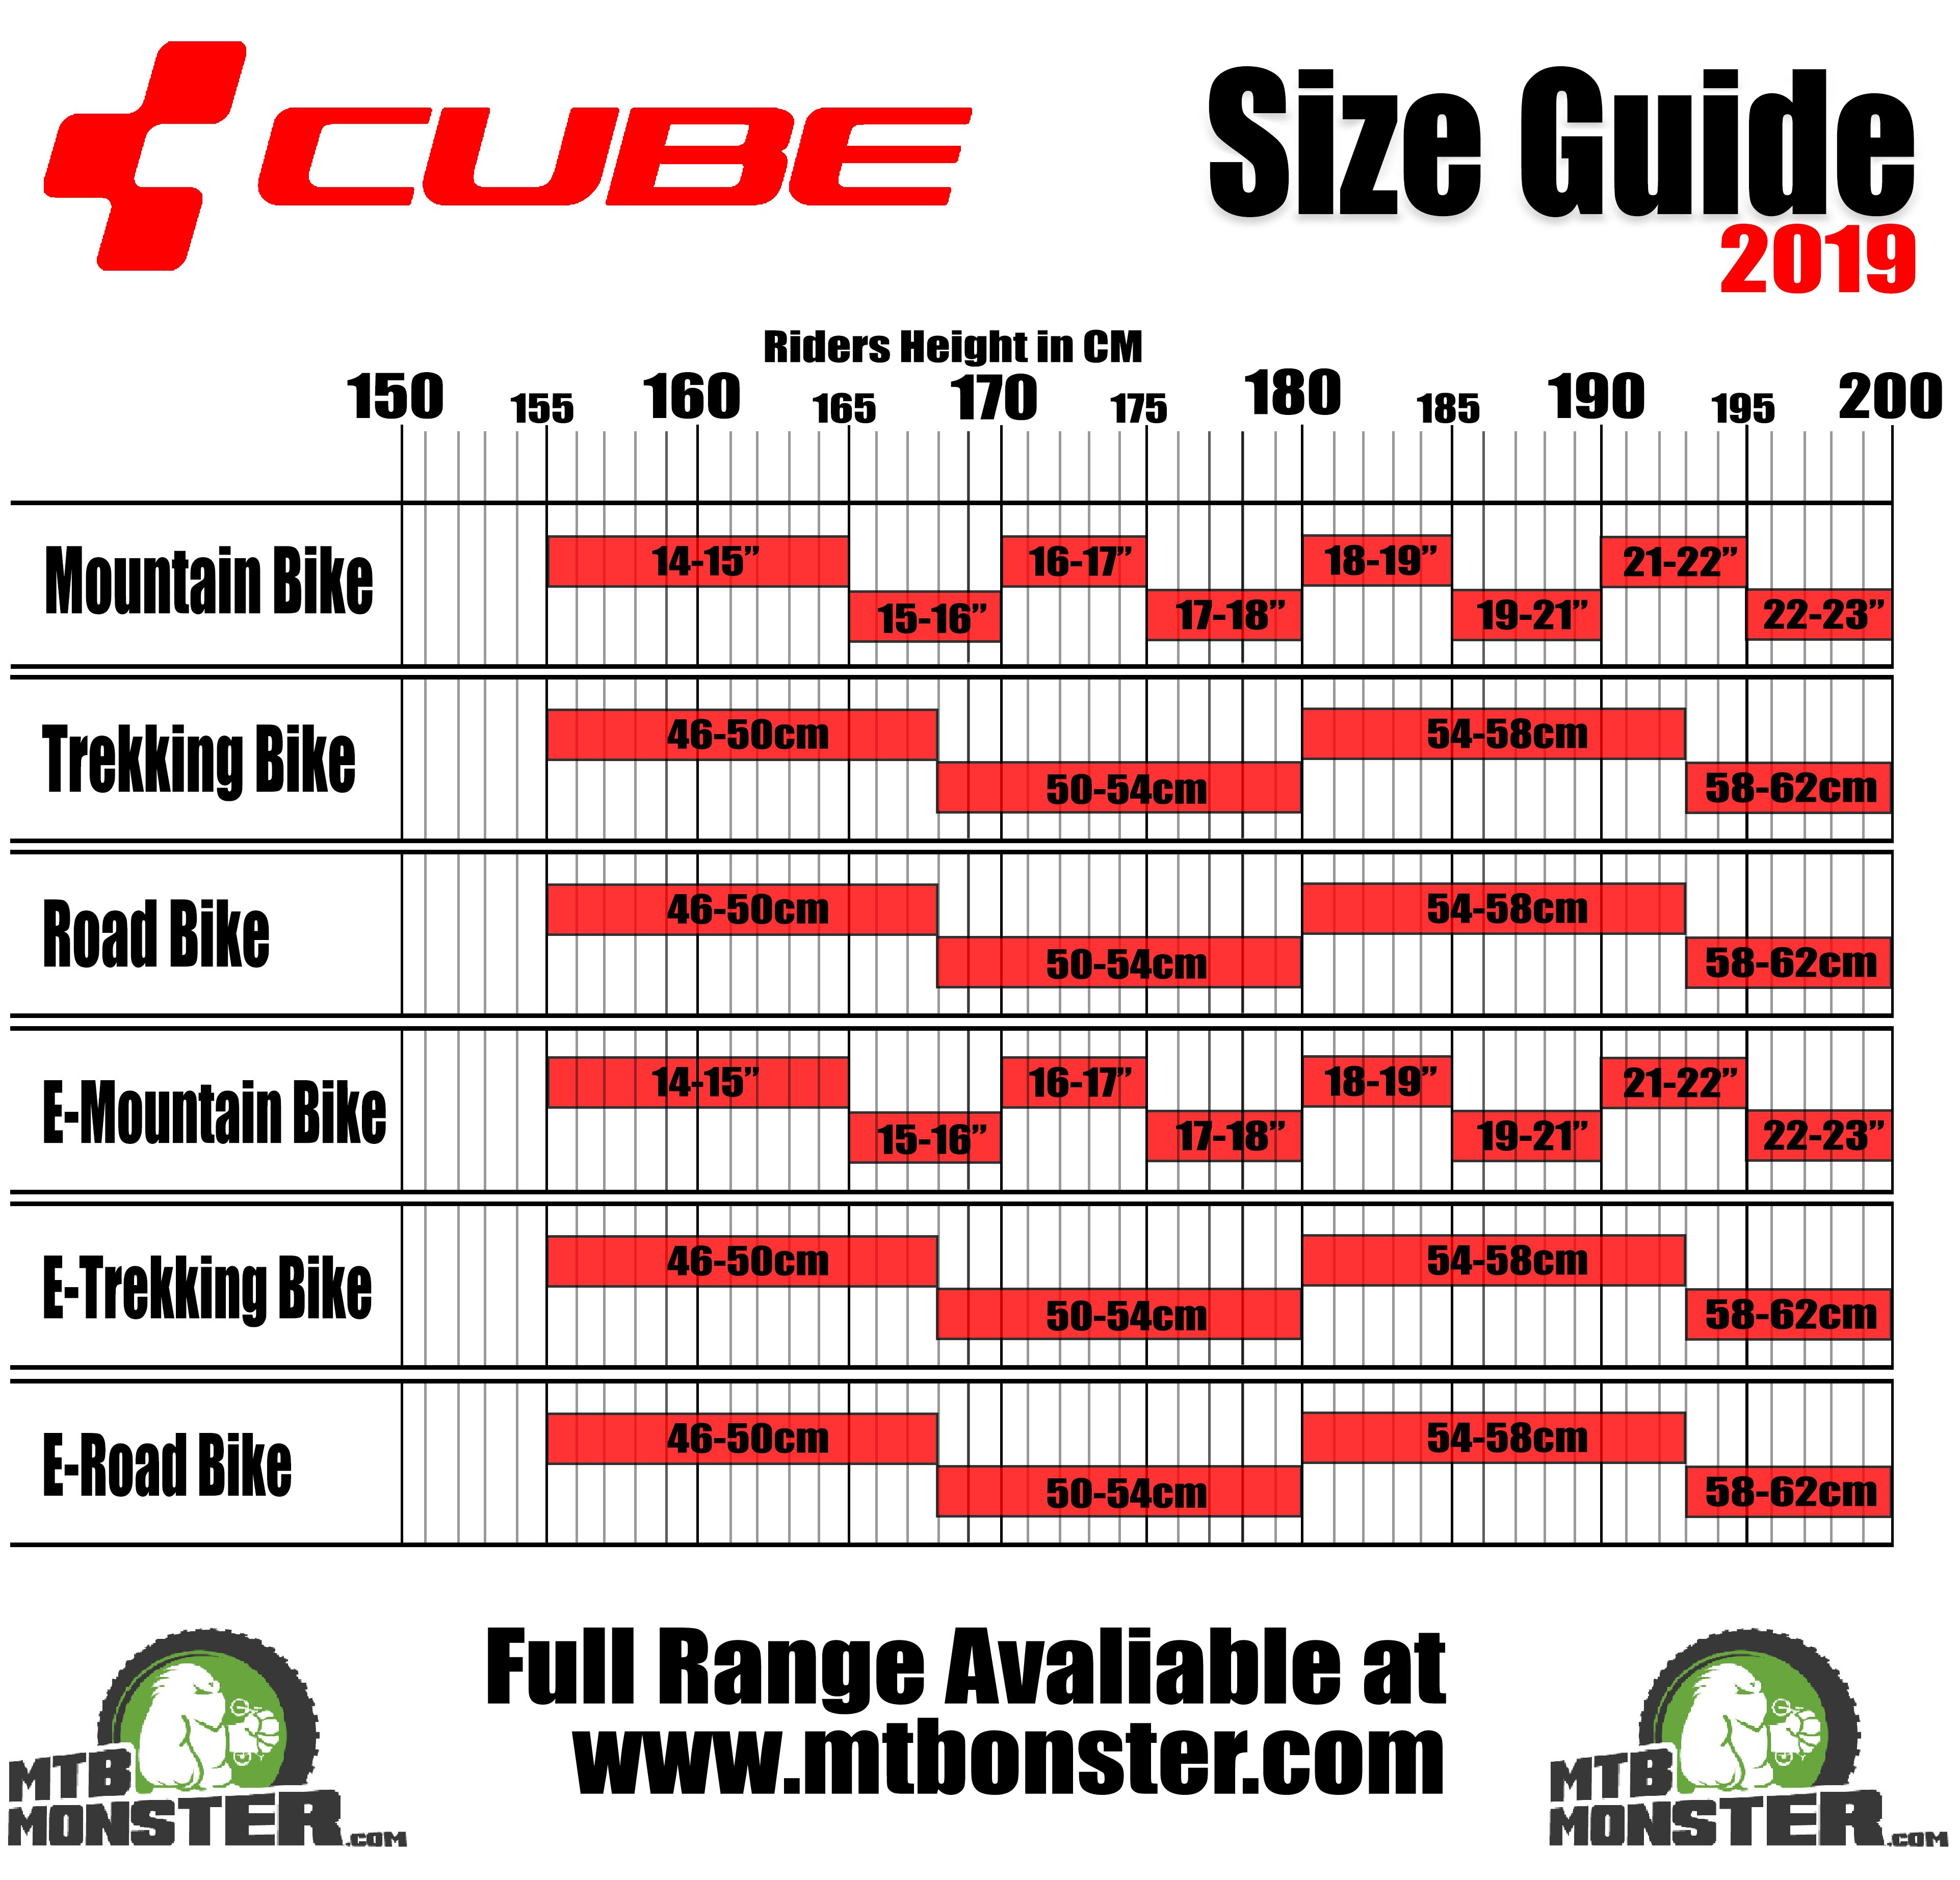 Cube Bikes 2019 Size Guide 2 